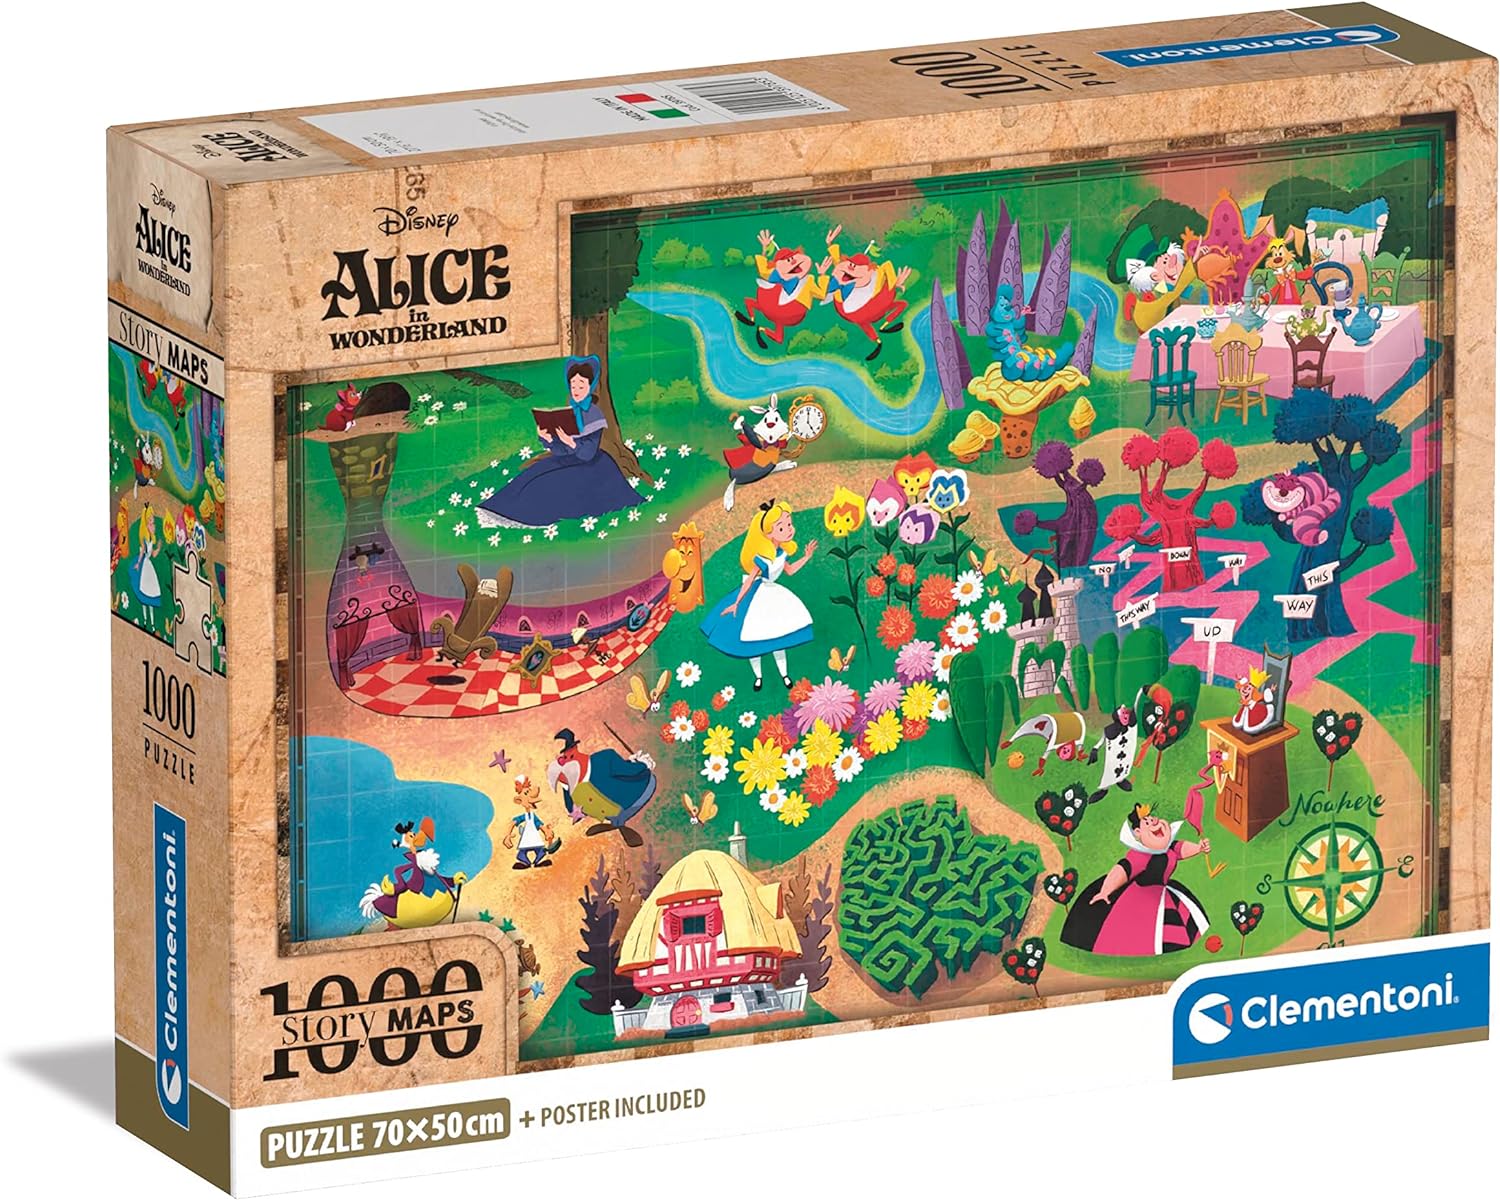 Clementoni Alice In Wonderland Story Maps 1000 Piece Puzzle – The ...